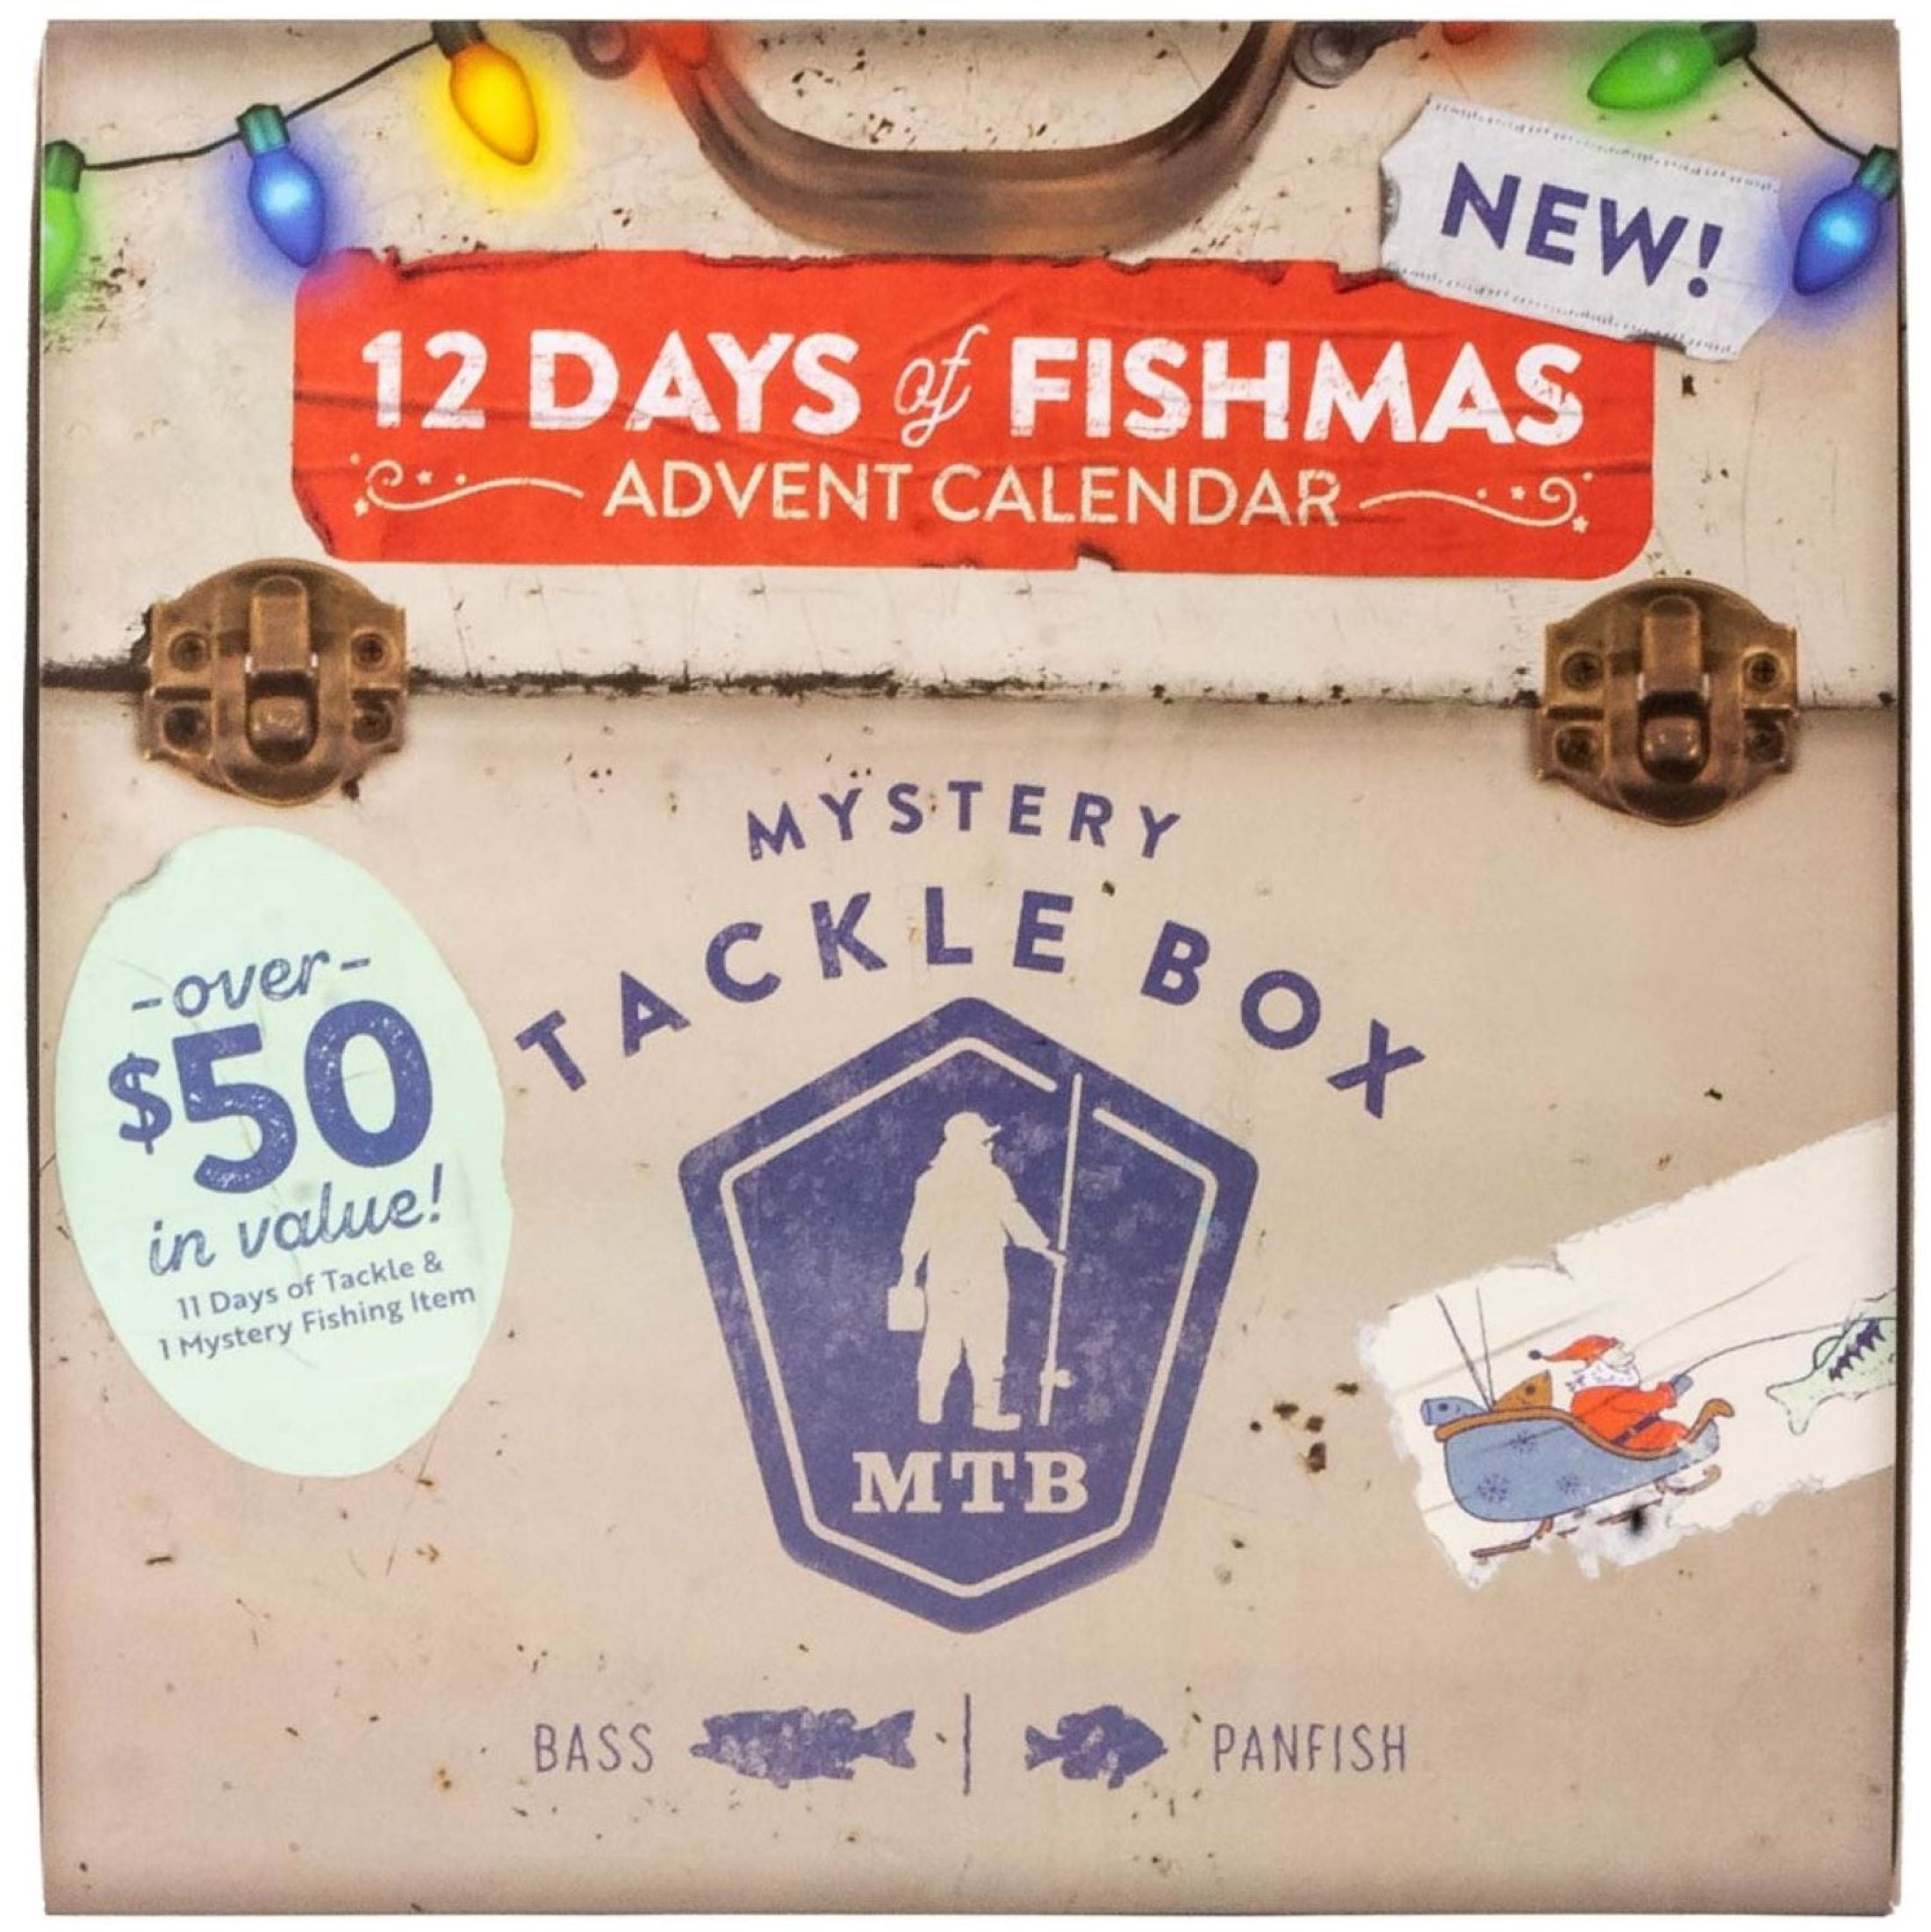 MYSTERY TACKLE BOX SERVES UP CHRISTMAS MIRACLES WITH 12 DAYS OF